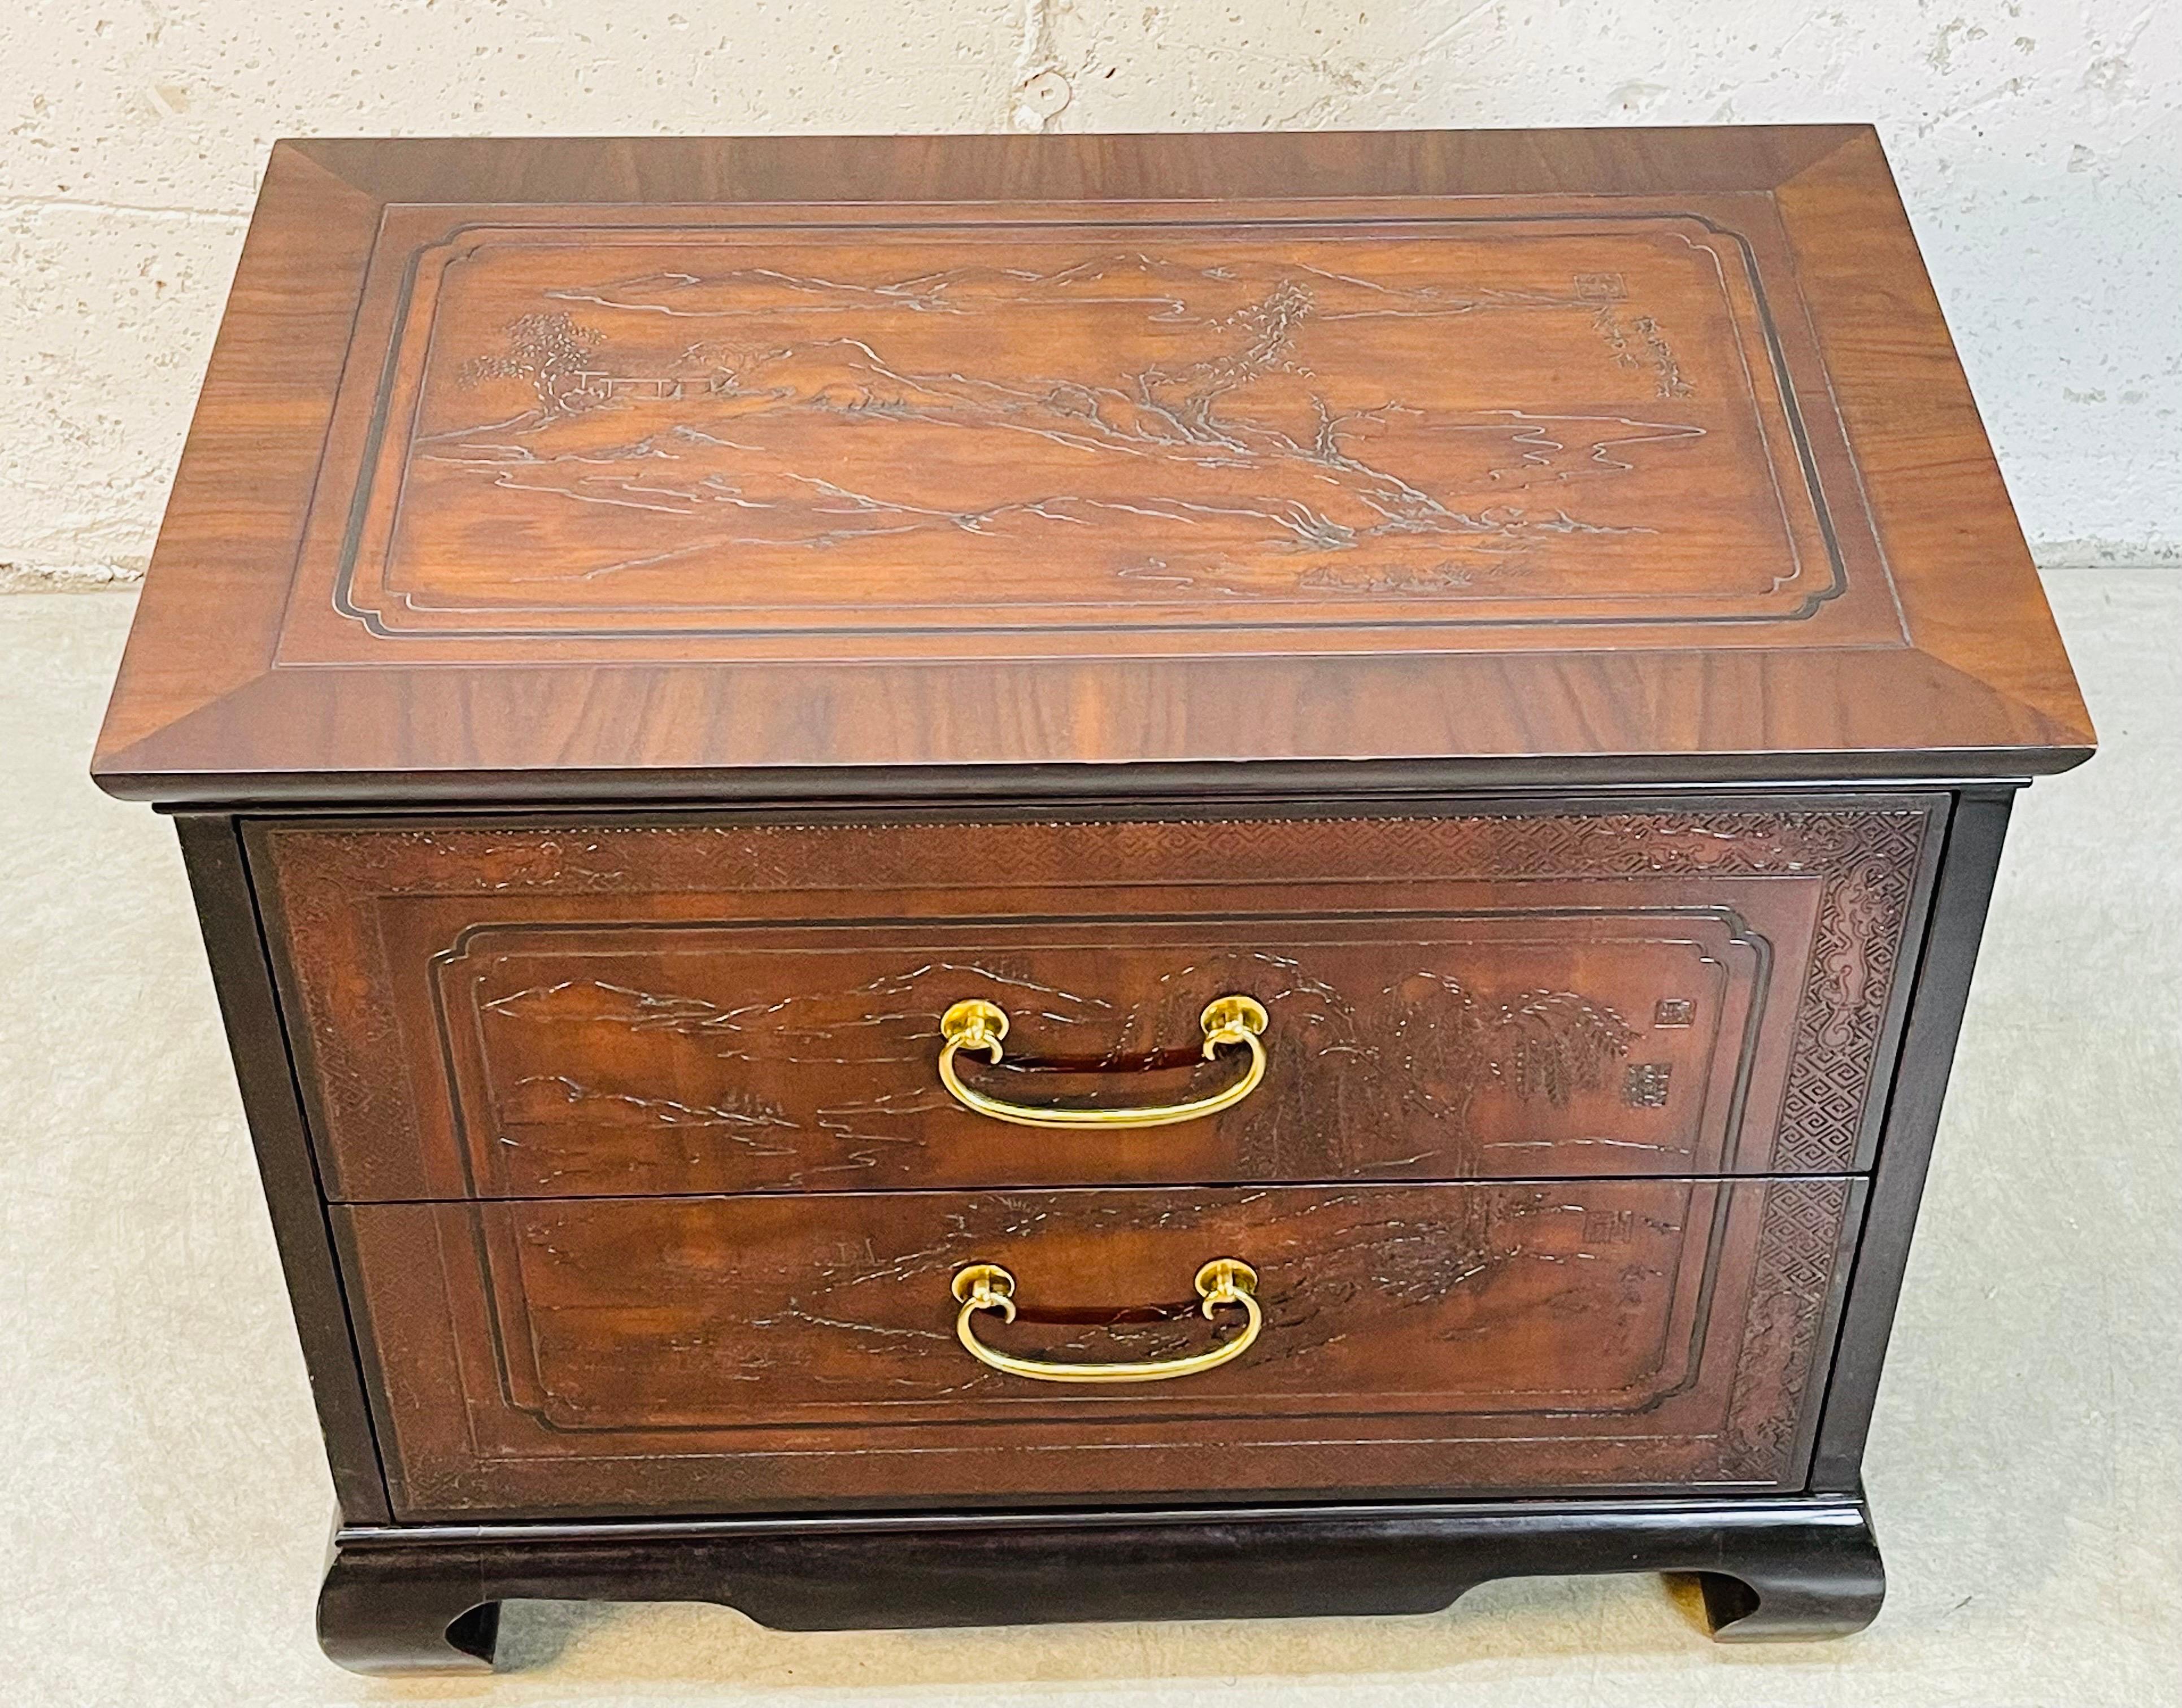 Vintage 1980s Drexel Heritage Asian style nightstand. The nightstand has two drawers for storage. The drawers are 4.75”H each. The dresser has solid brass pulls. The Asian scenes cover the top, front and both sides. Marked.